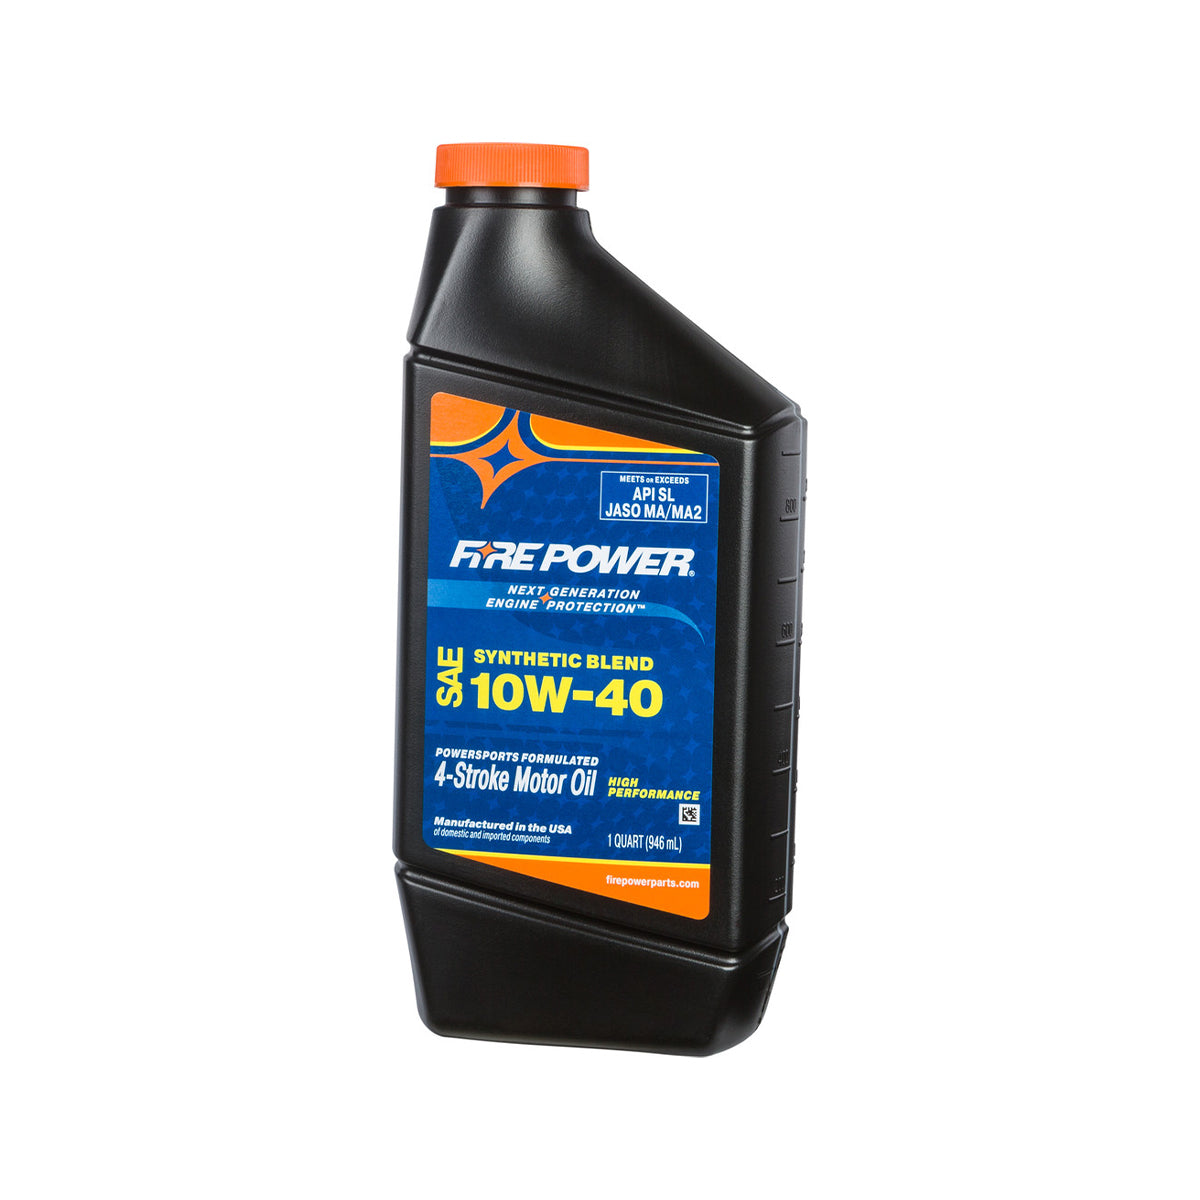 Fire Power Synthetic Blend Oil